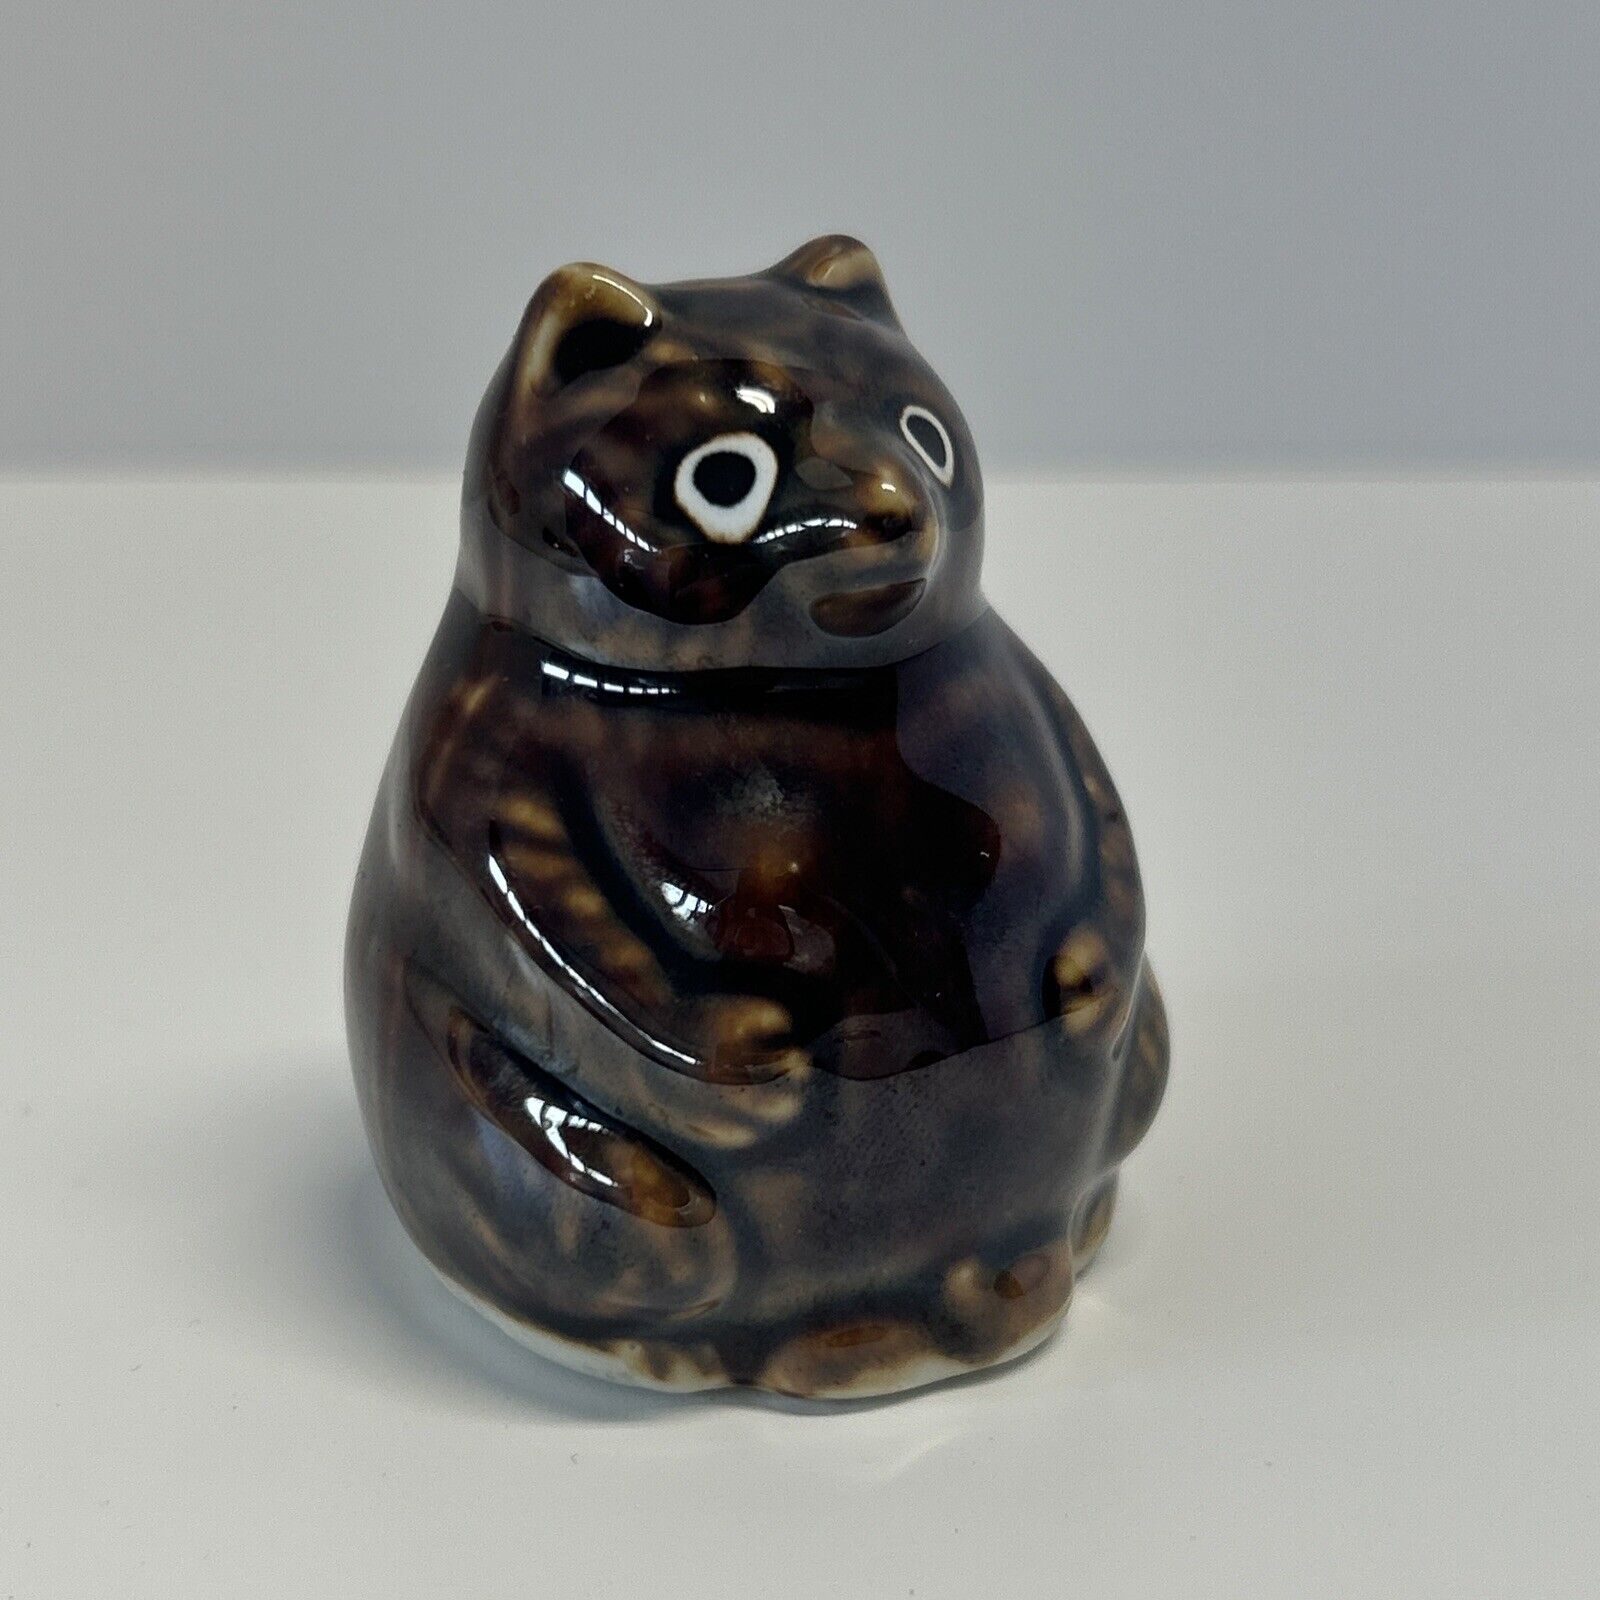 Hand Painted Fat Cat Ceramic Brown Figurine Figure 2.5” Bear Racoon Hand Made